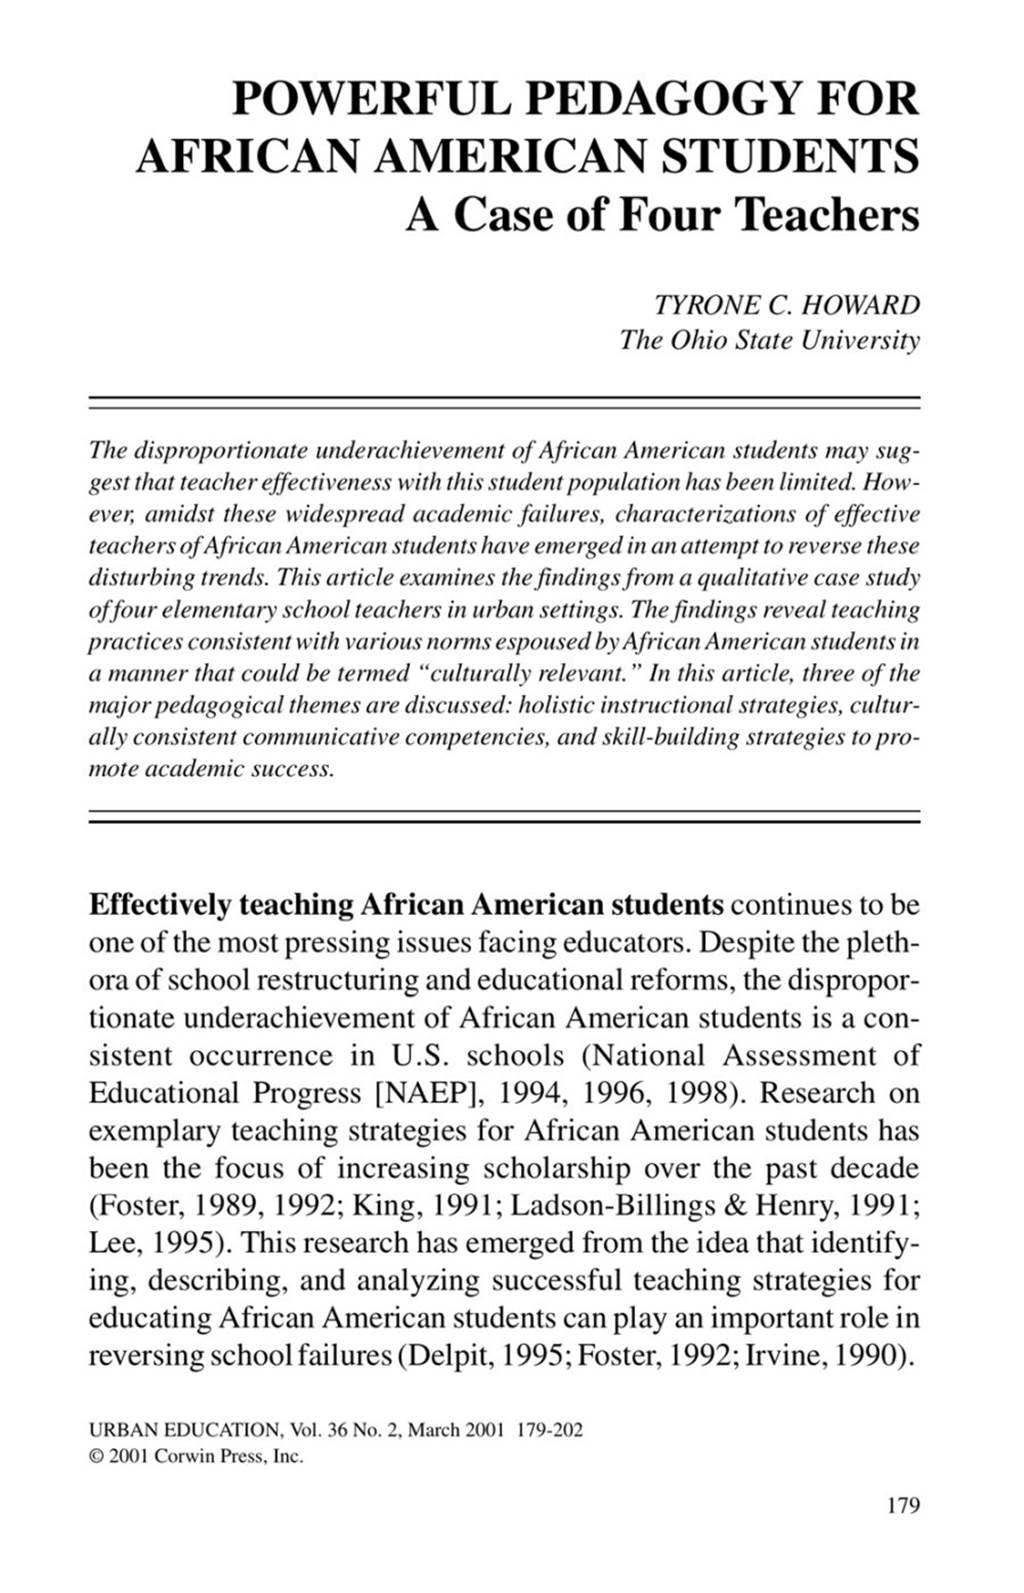 Powerful Pedagogy for African American Students Image